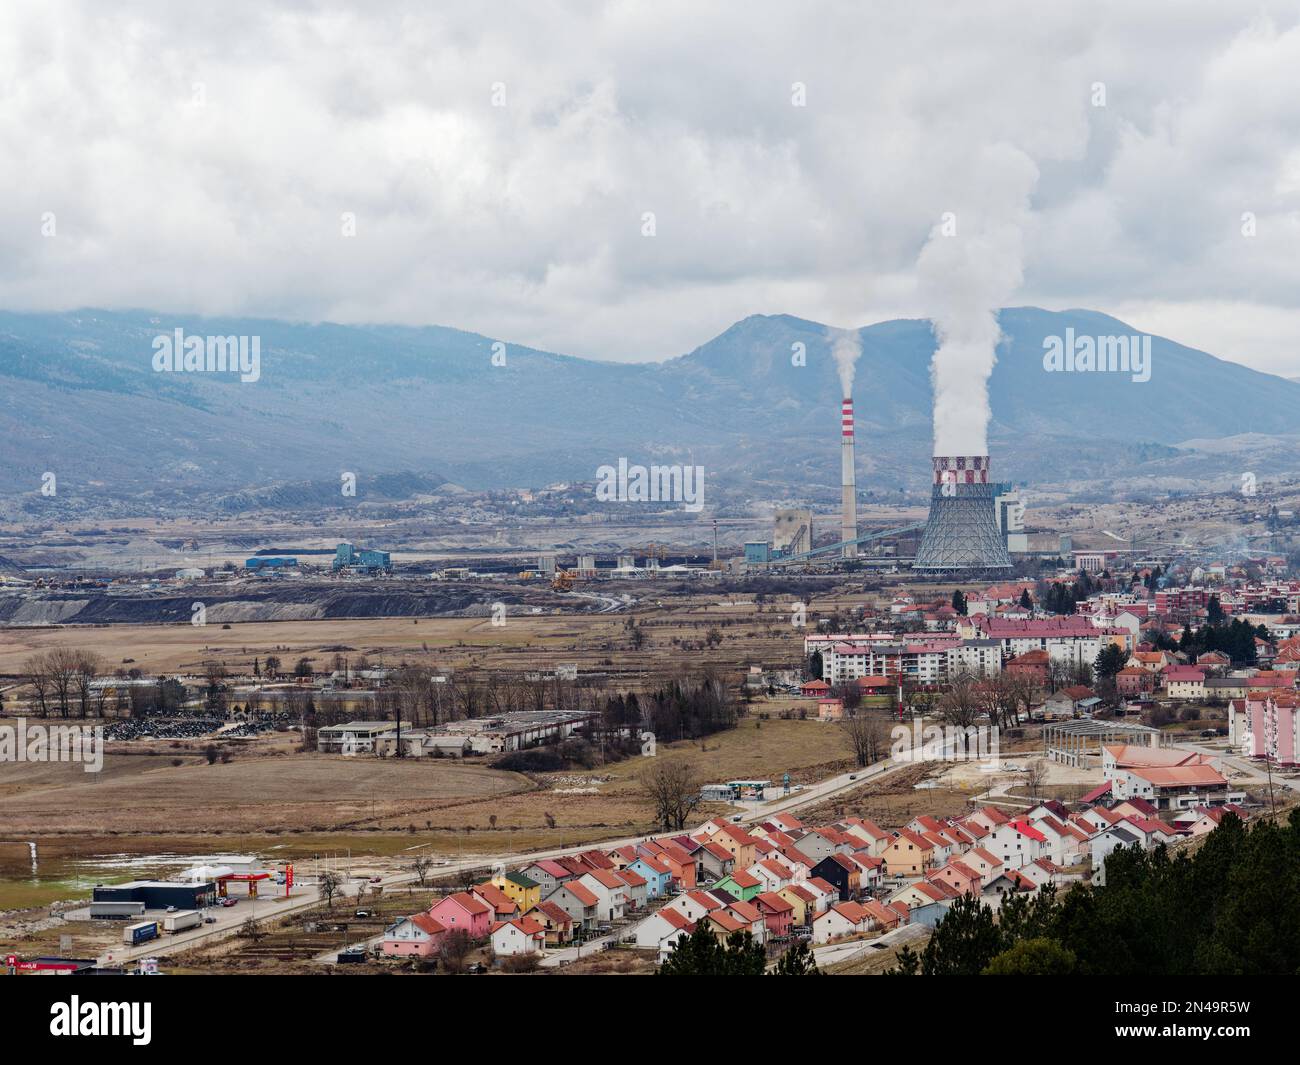 Thermal power station expelling pollutants to the air. City with poor air quality due to thermal power plant. Burning fossil fuel. Toxic air. Stock Photo